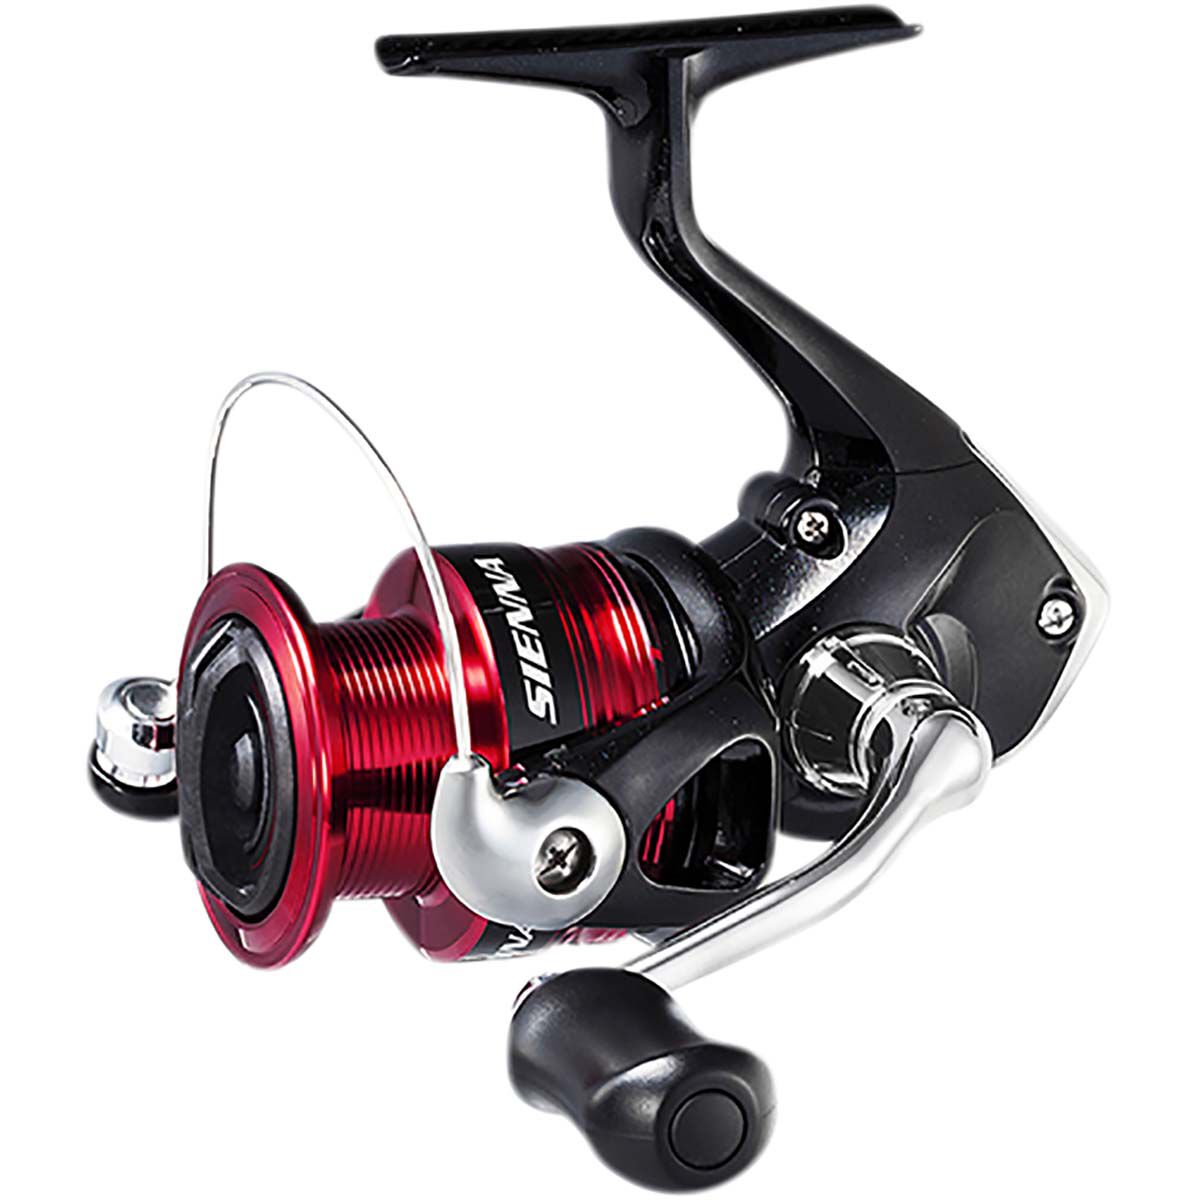 SHIMANO Sienna, 1000, left and right hand, Spinning fishing reel, front  drag, noise when cranking, signs of use, without packaging